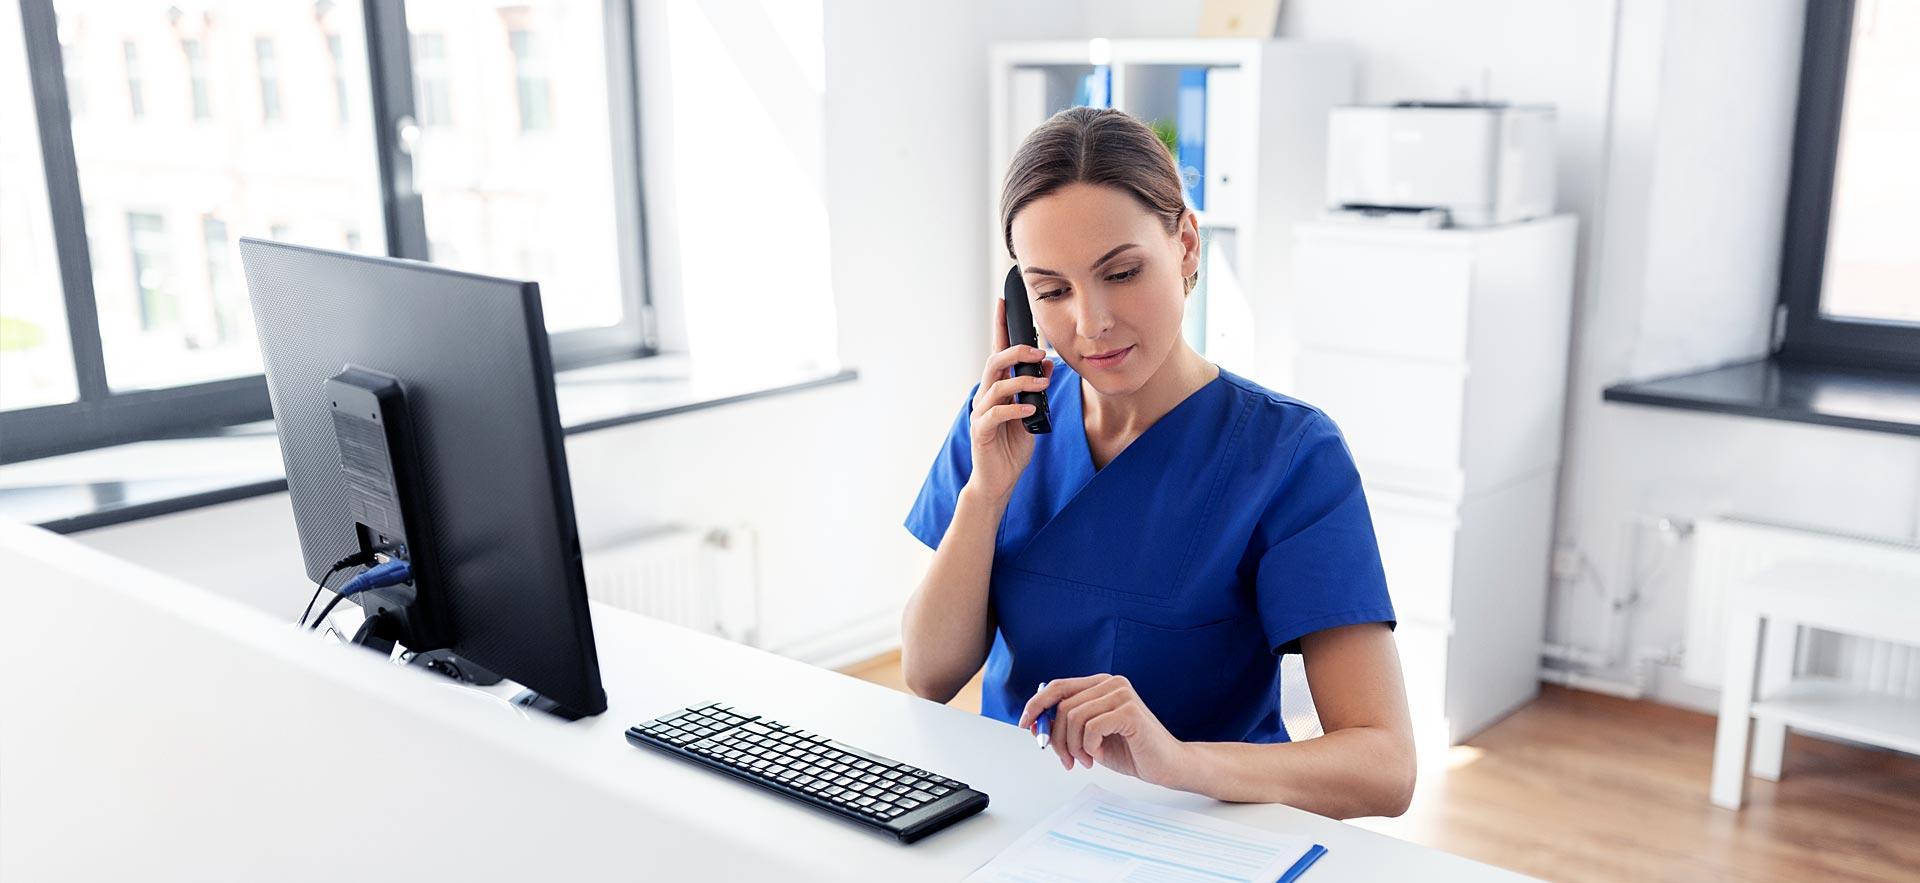 Female health office worker answers phone at her desk.